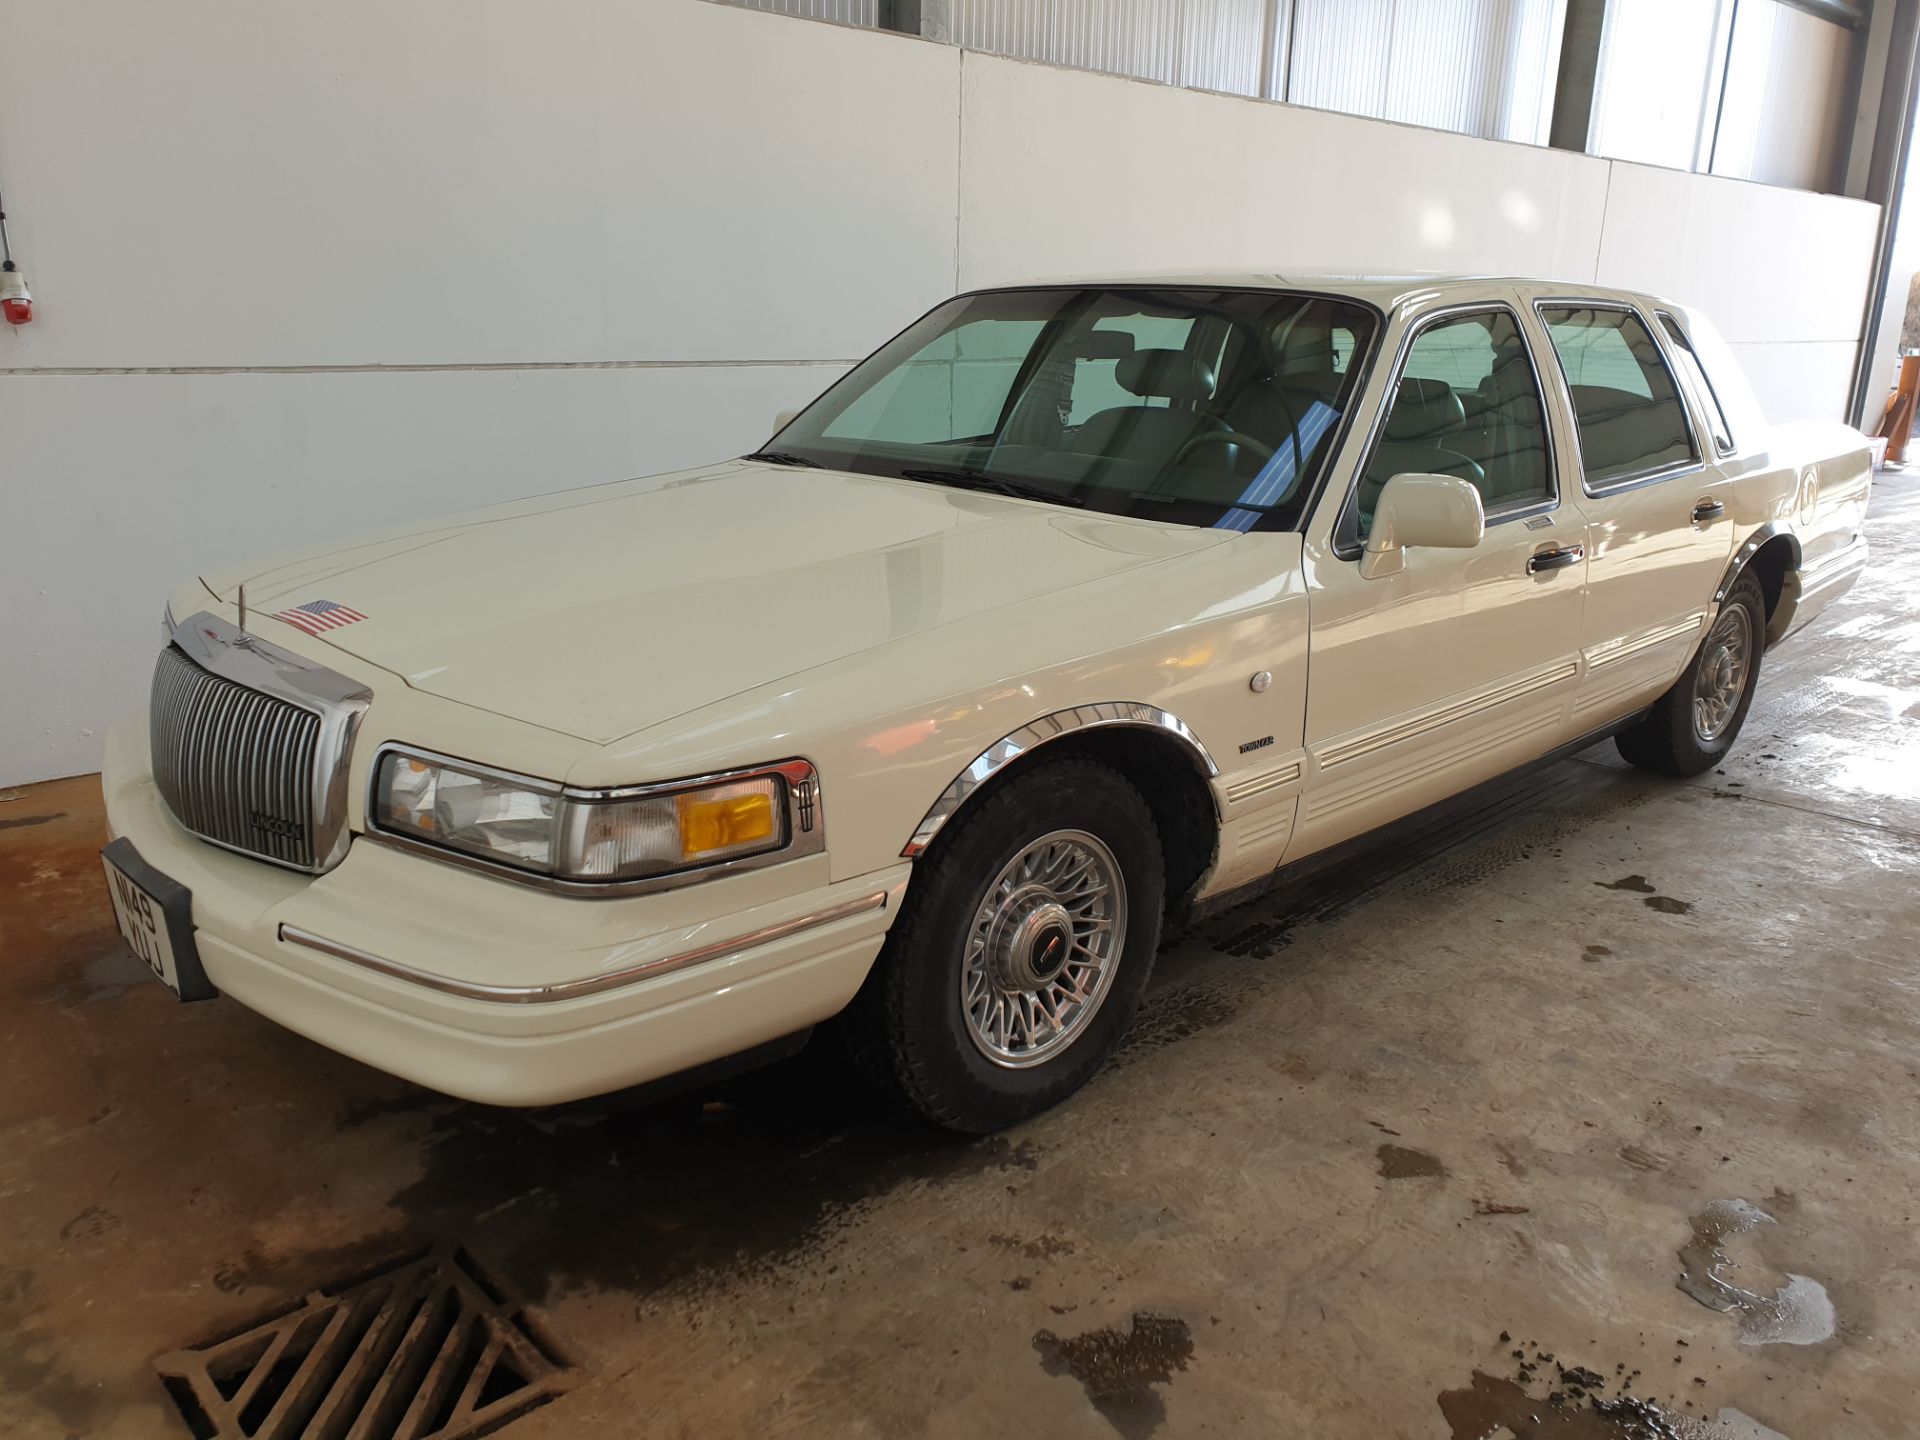 1999 Lincoln Town Car - Image 7 of 16